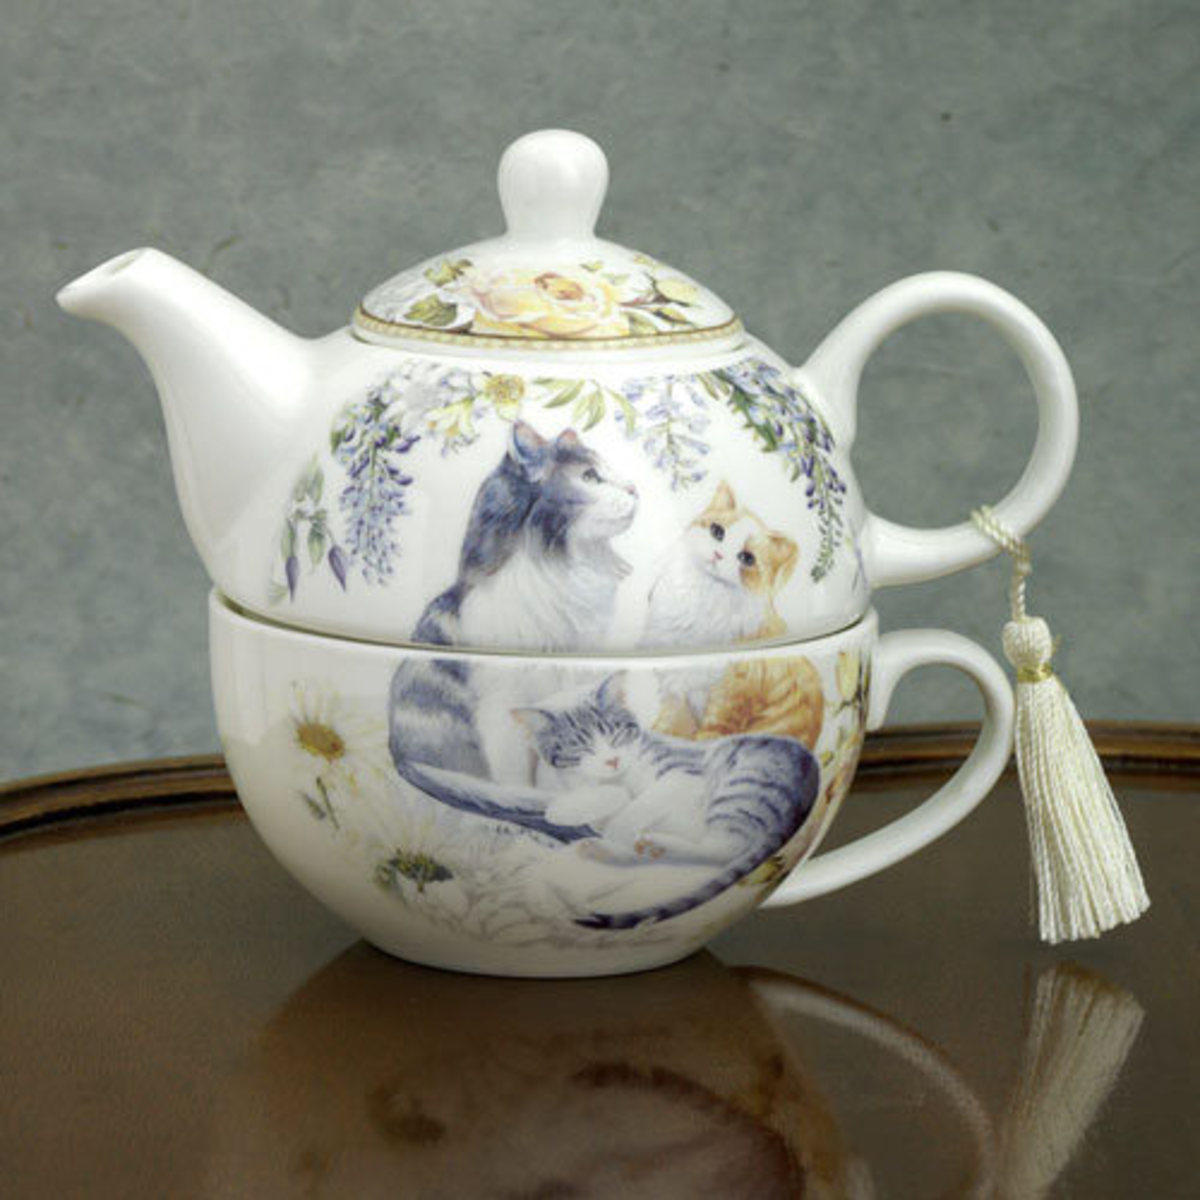 This pretty teapot and cup is perfect for the cat lover on your gift list.